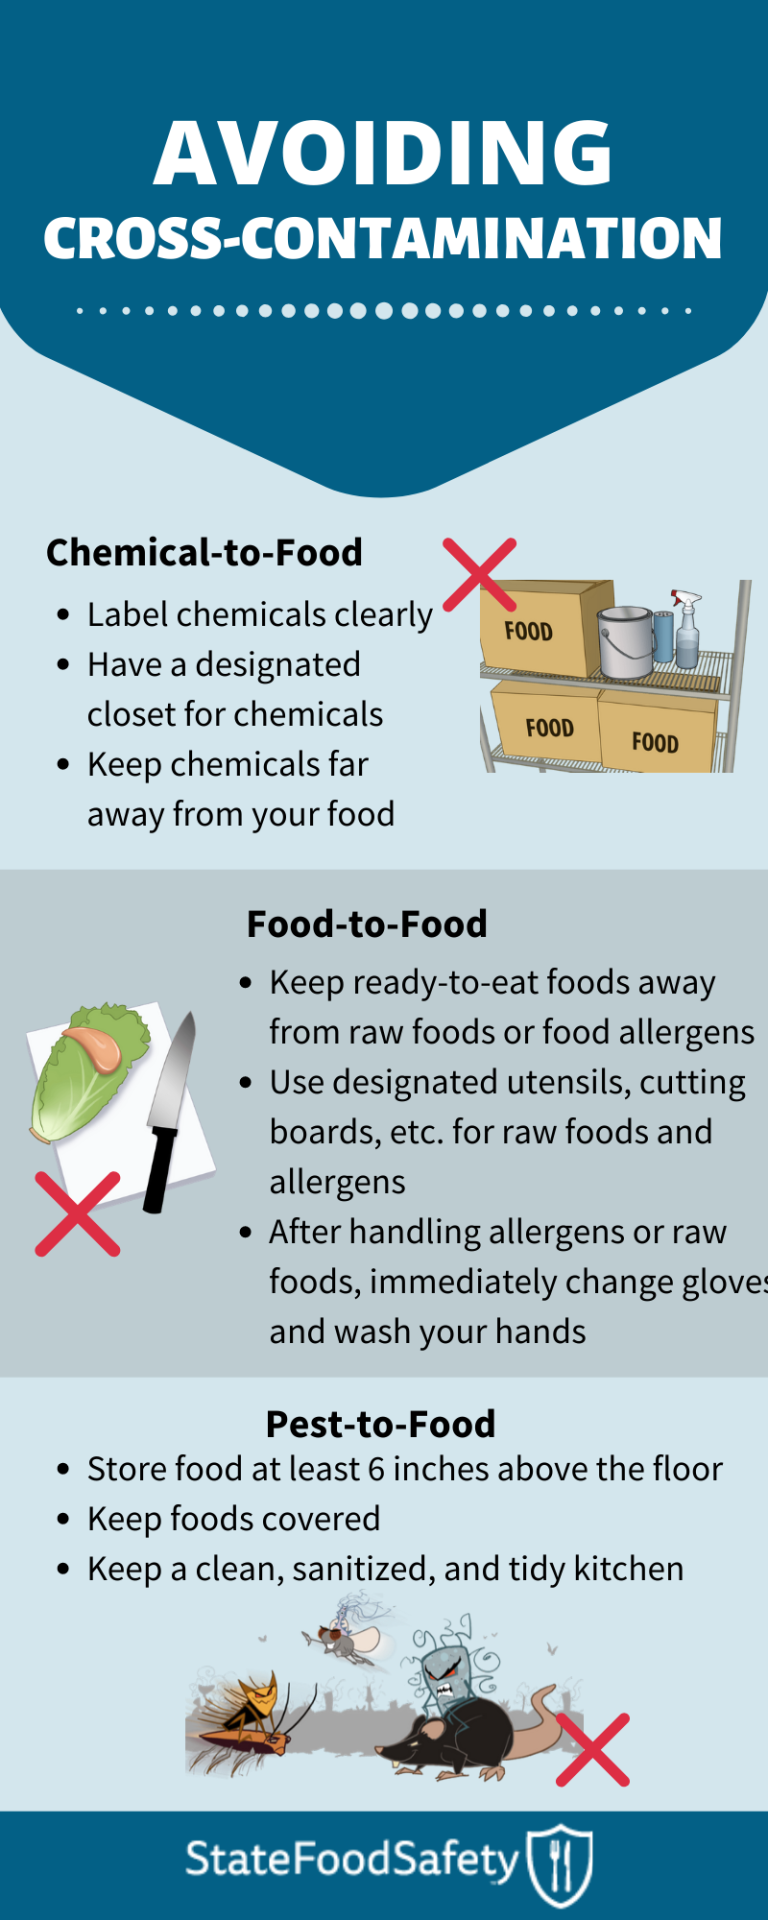 Preventing Cross-Contamination in Food: Crucial Tips for a Safe Kitchen